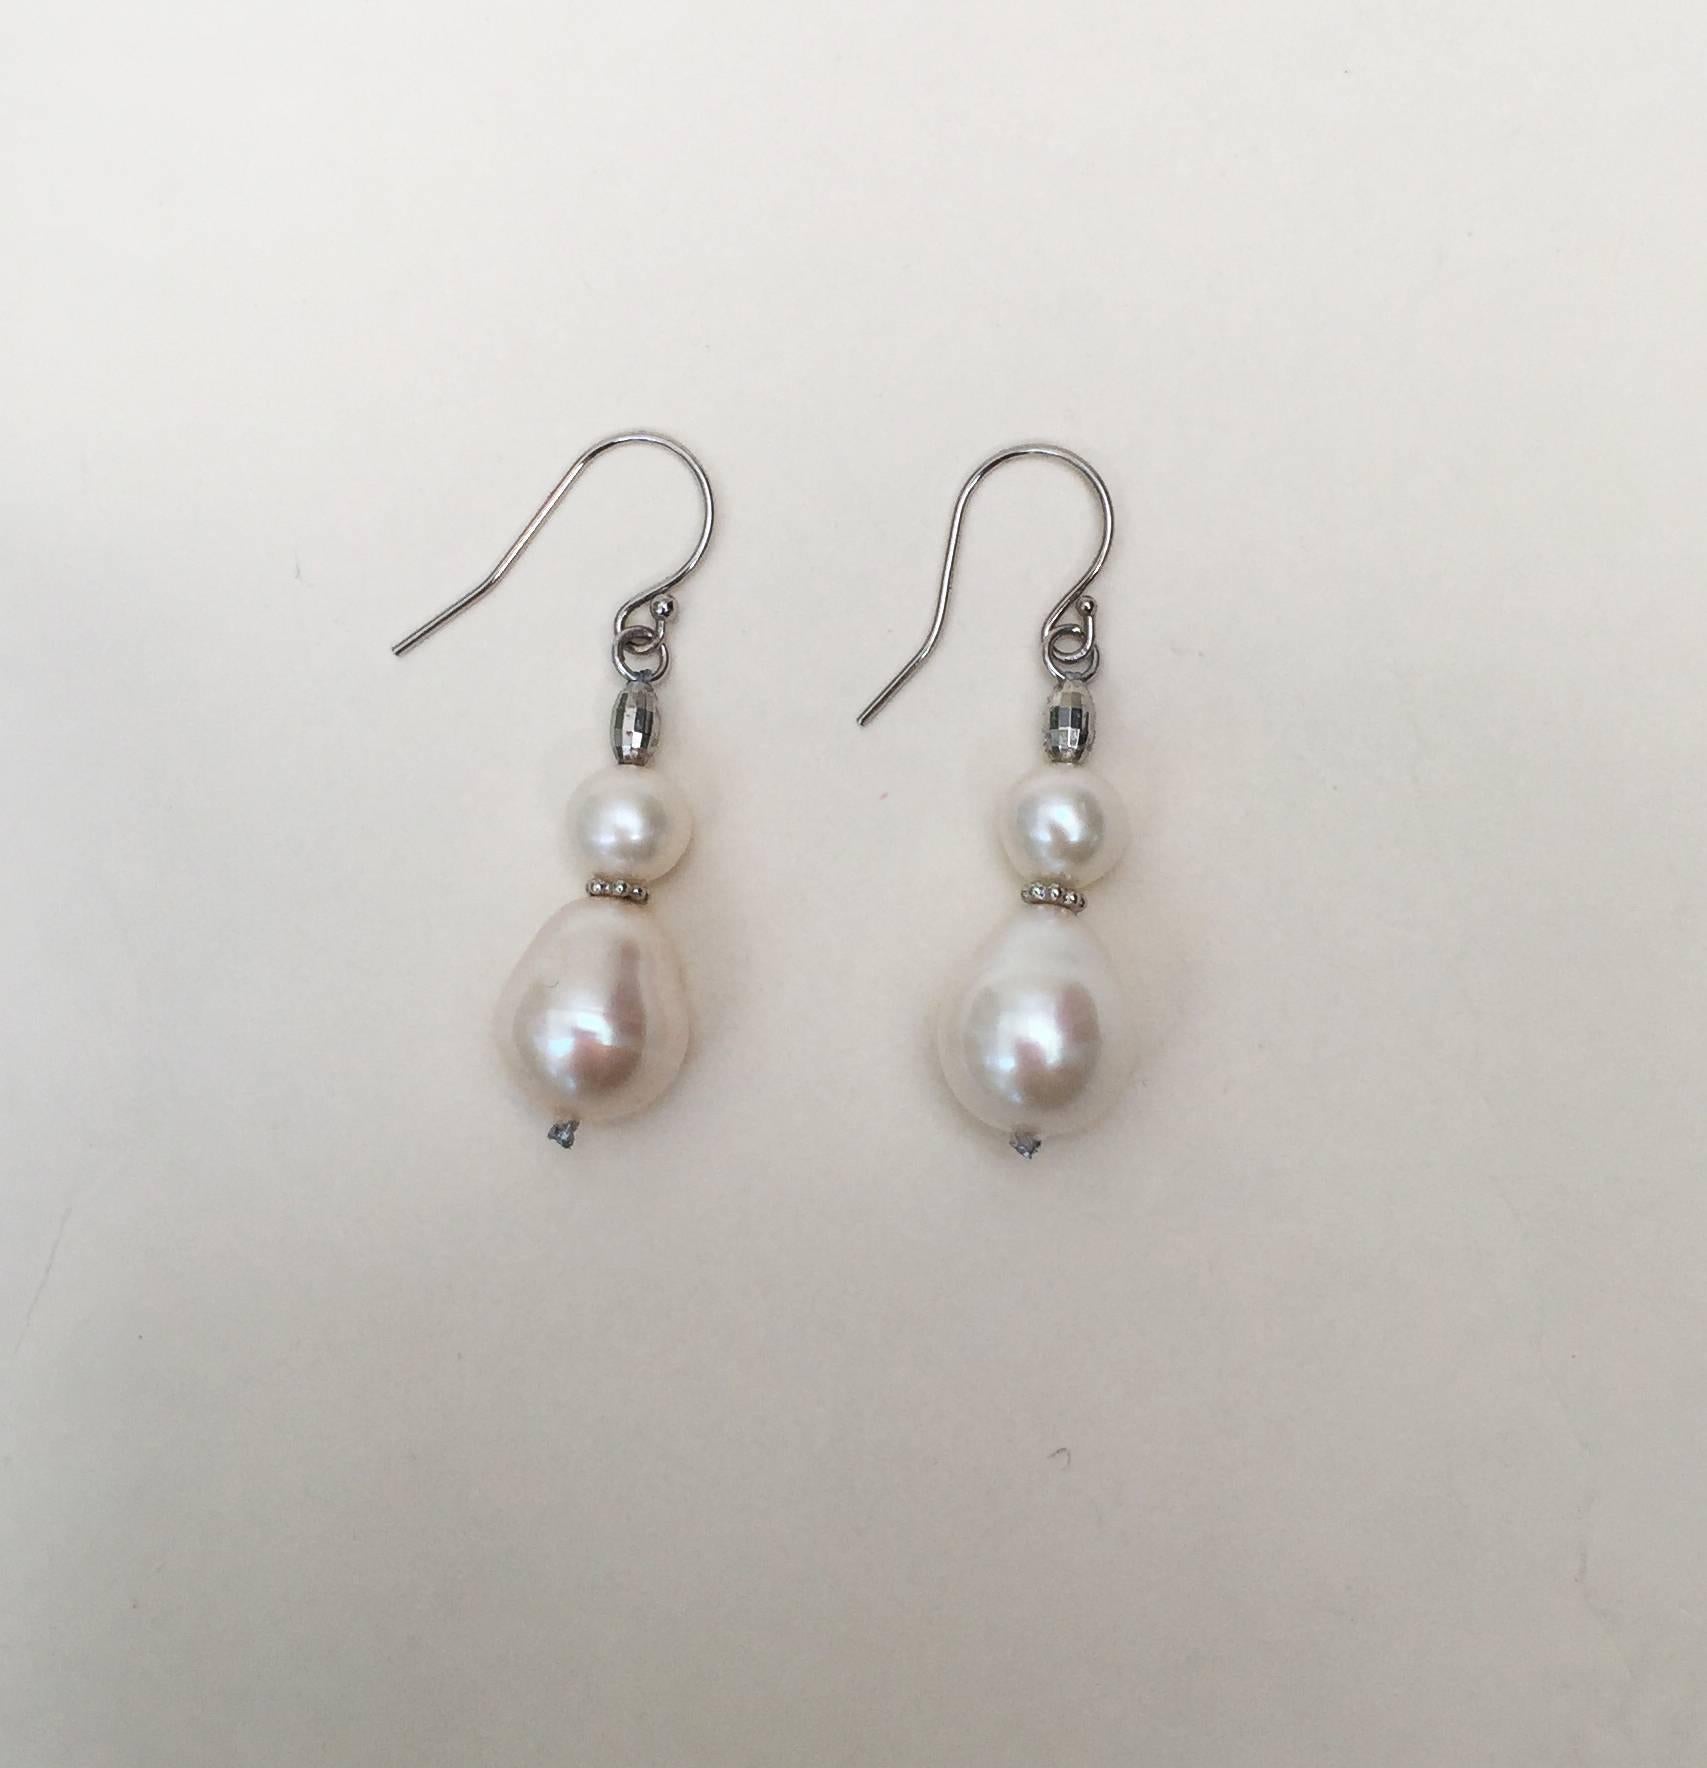 Double Pearl Earrings with Platinum Plated Silver Beads by Marina J. 1